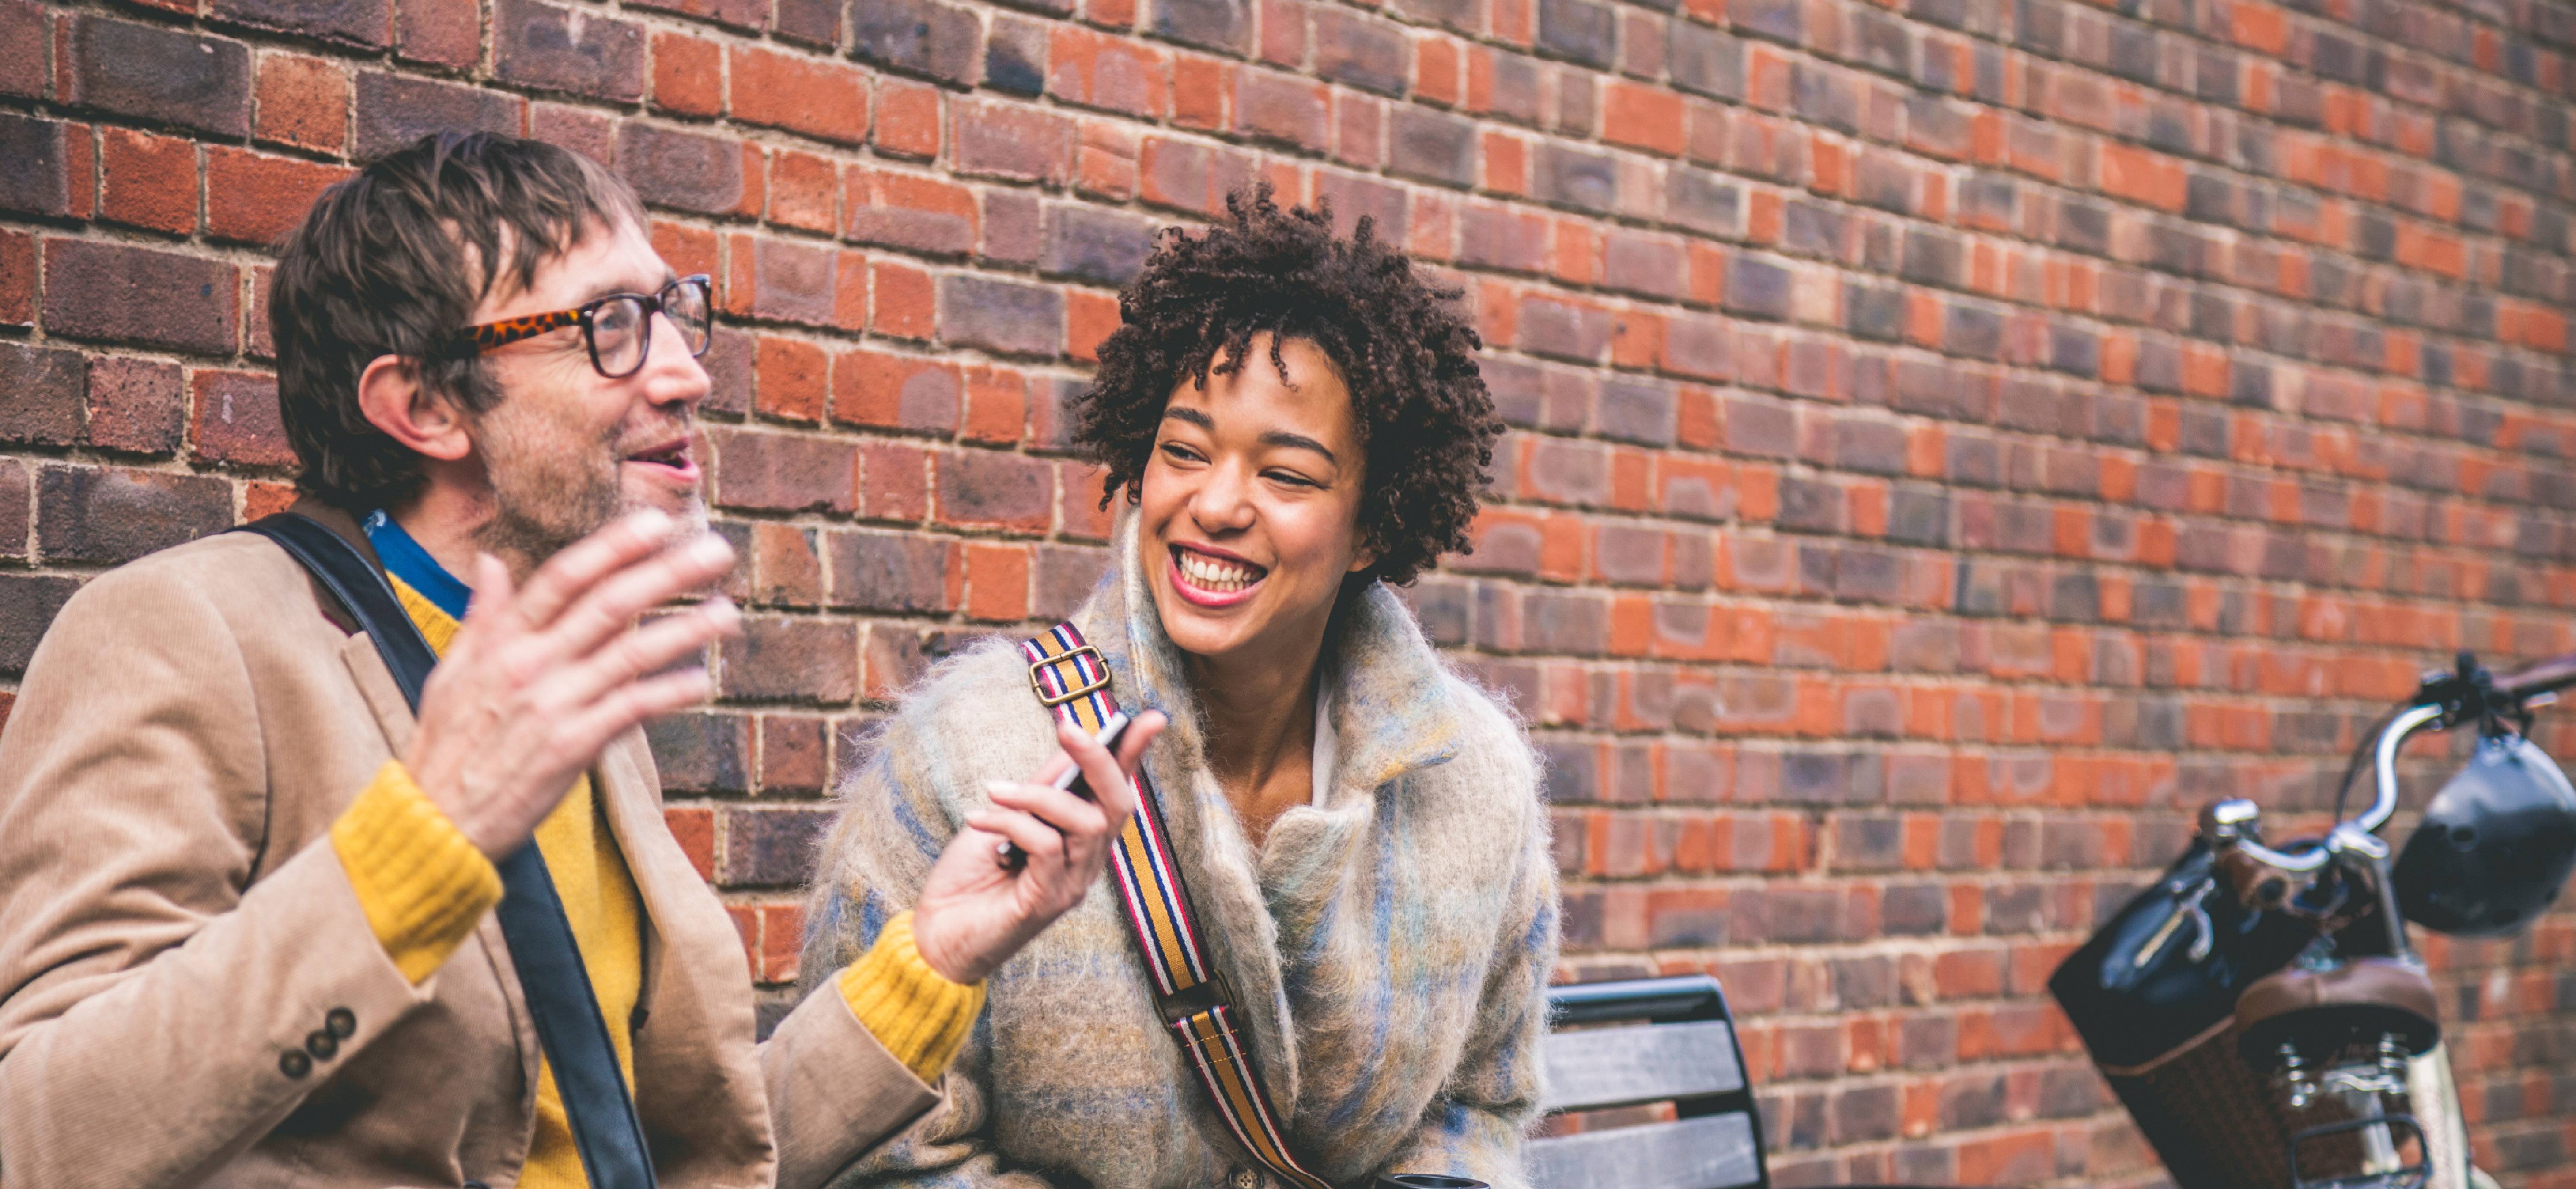 Want To Have A Conversation With Anyone Easily? You Should Know These 7 Tricks